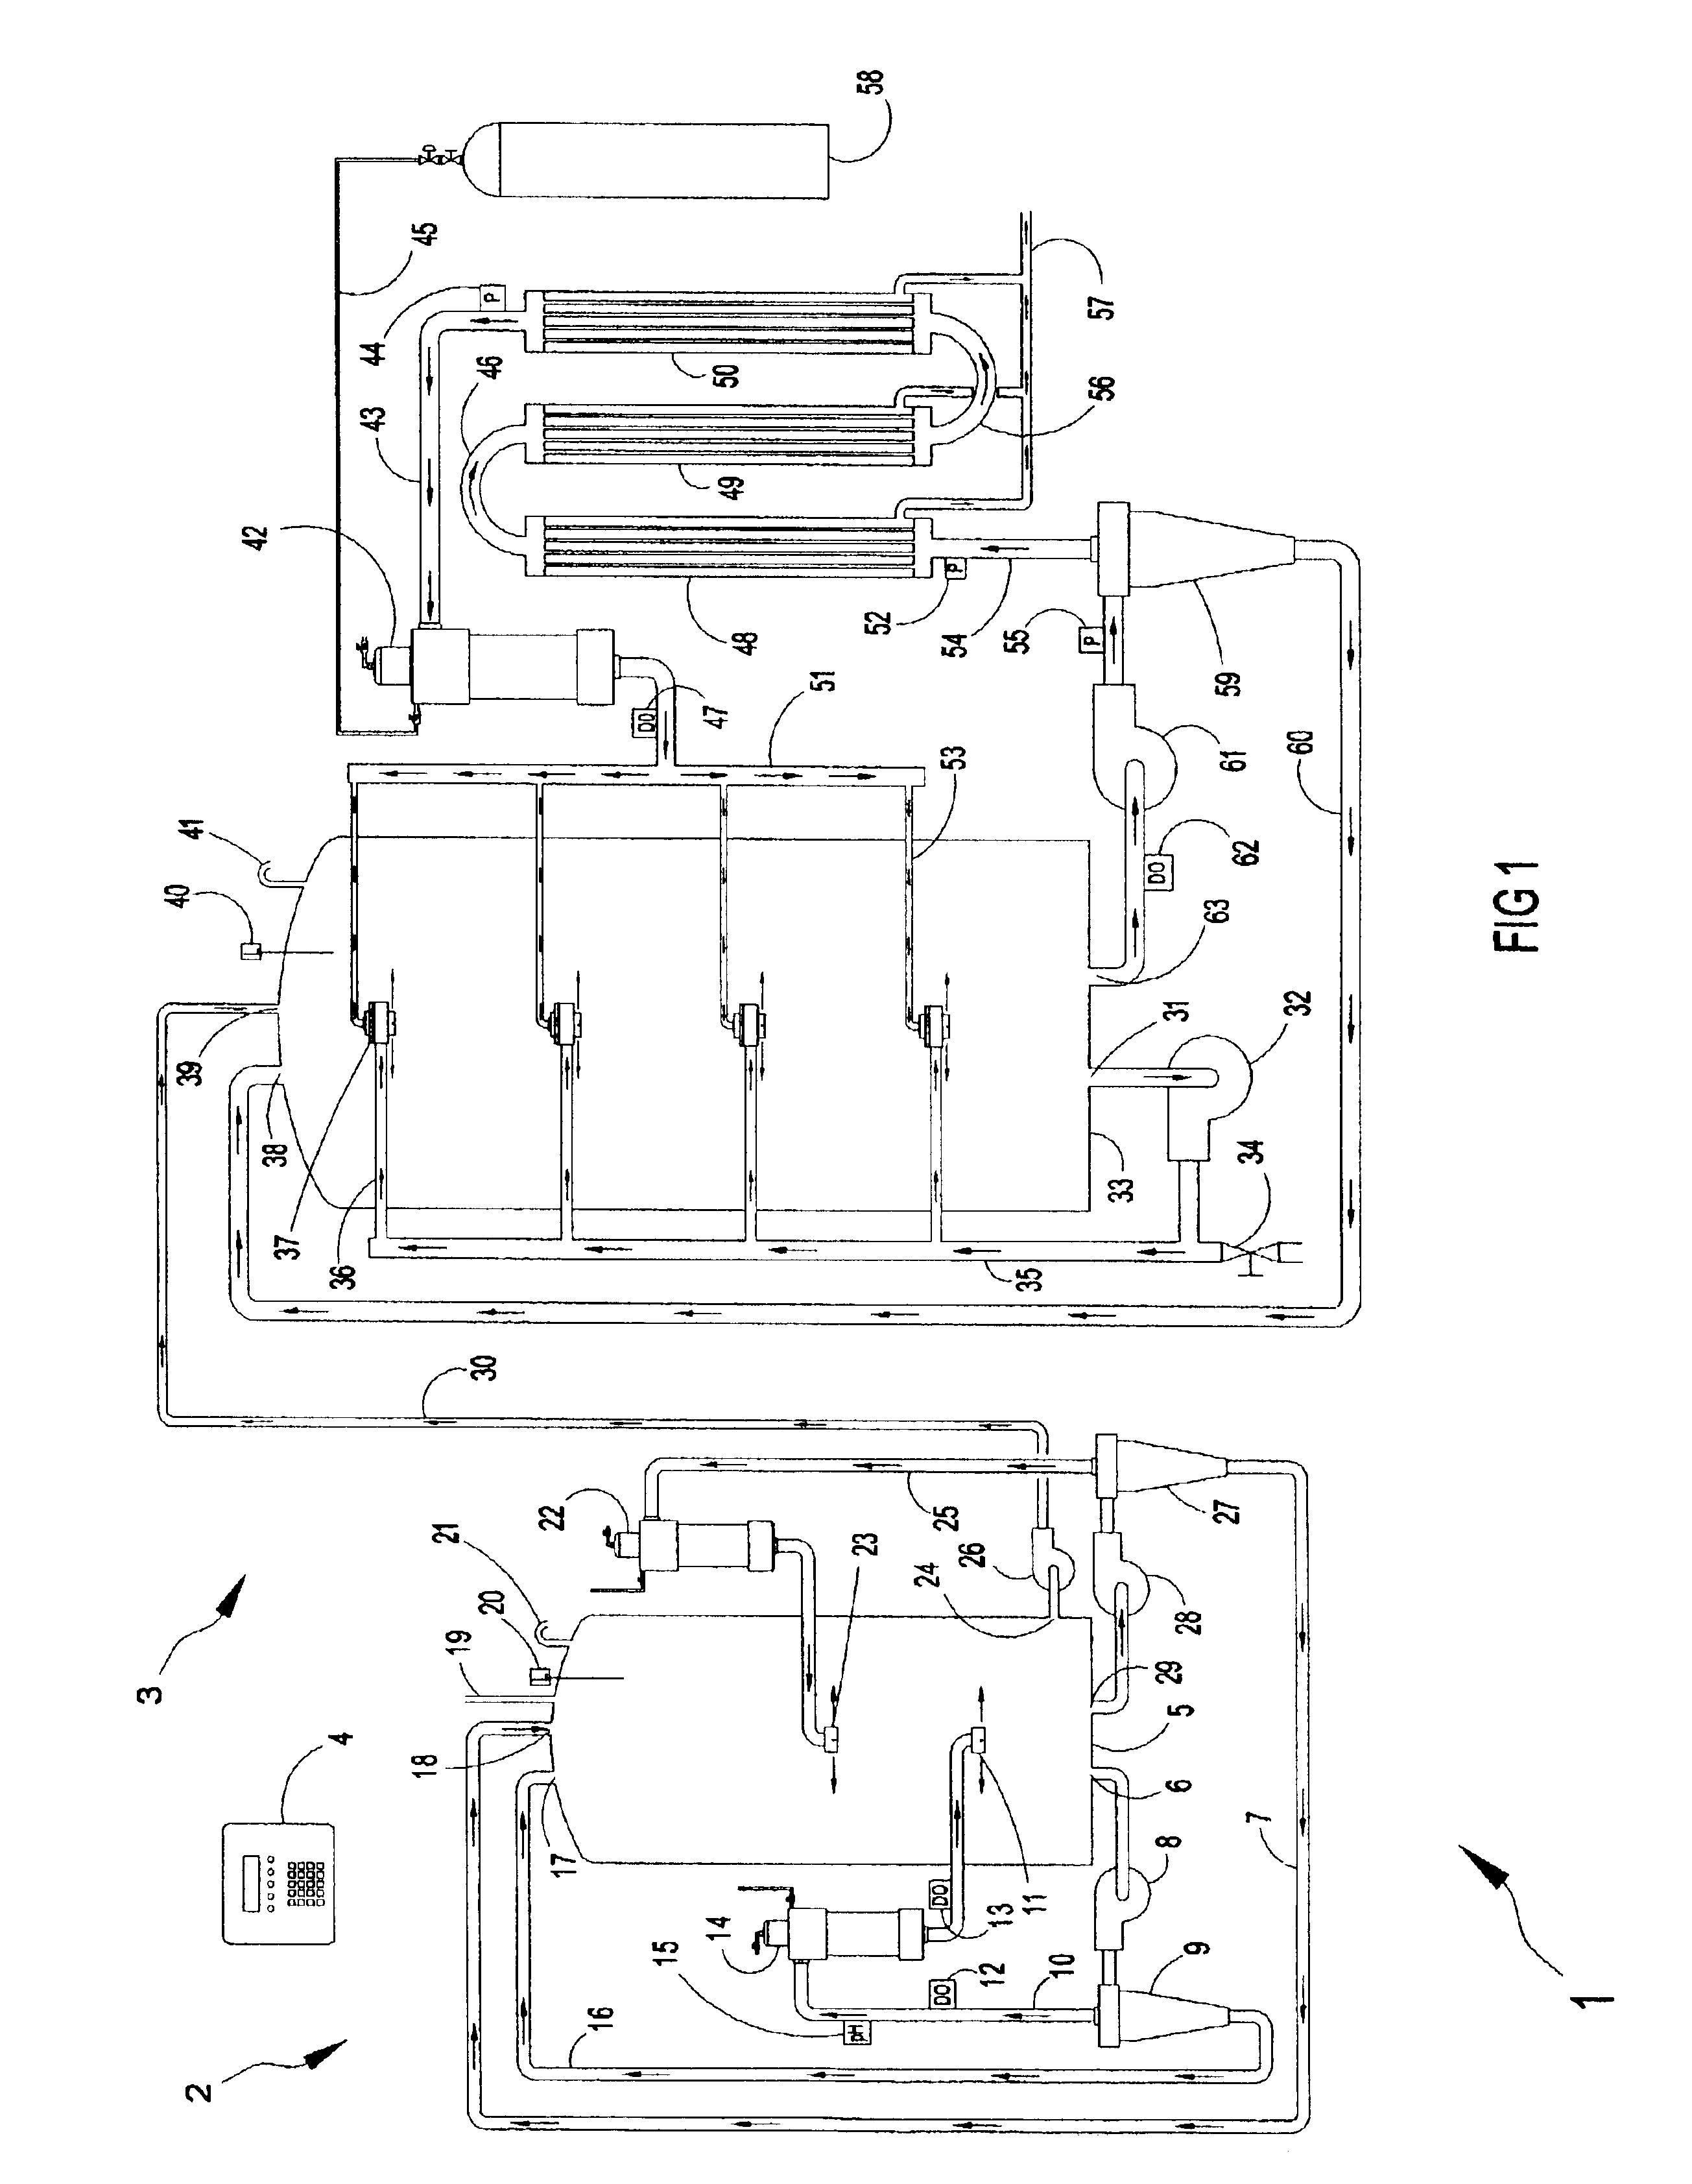 Method and apparatus for treatment of wastewater employing membrane bioreactors